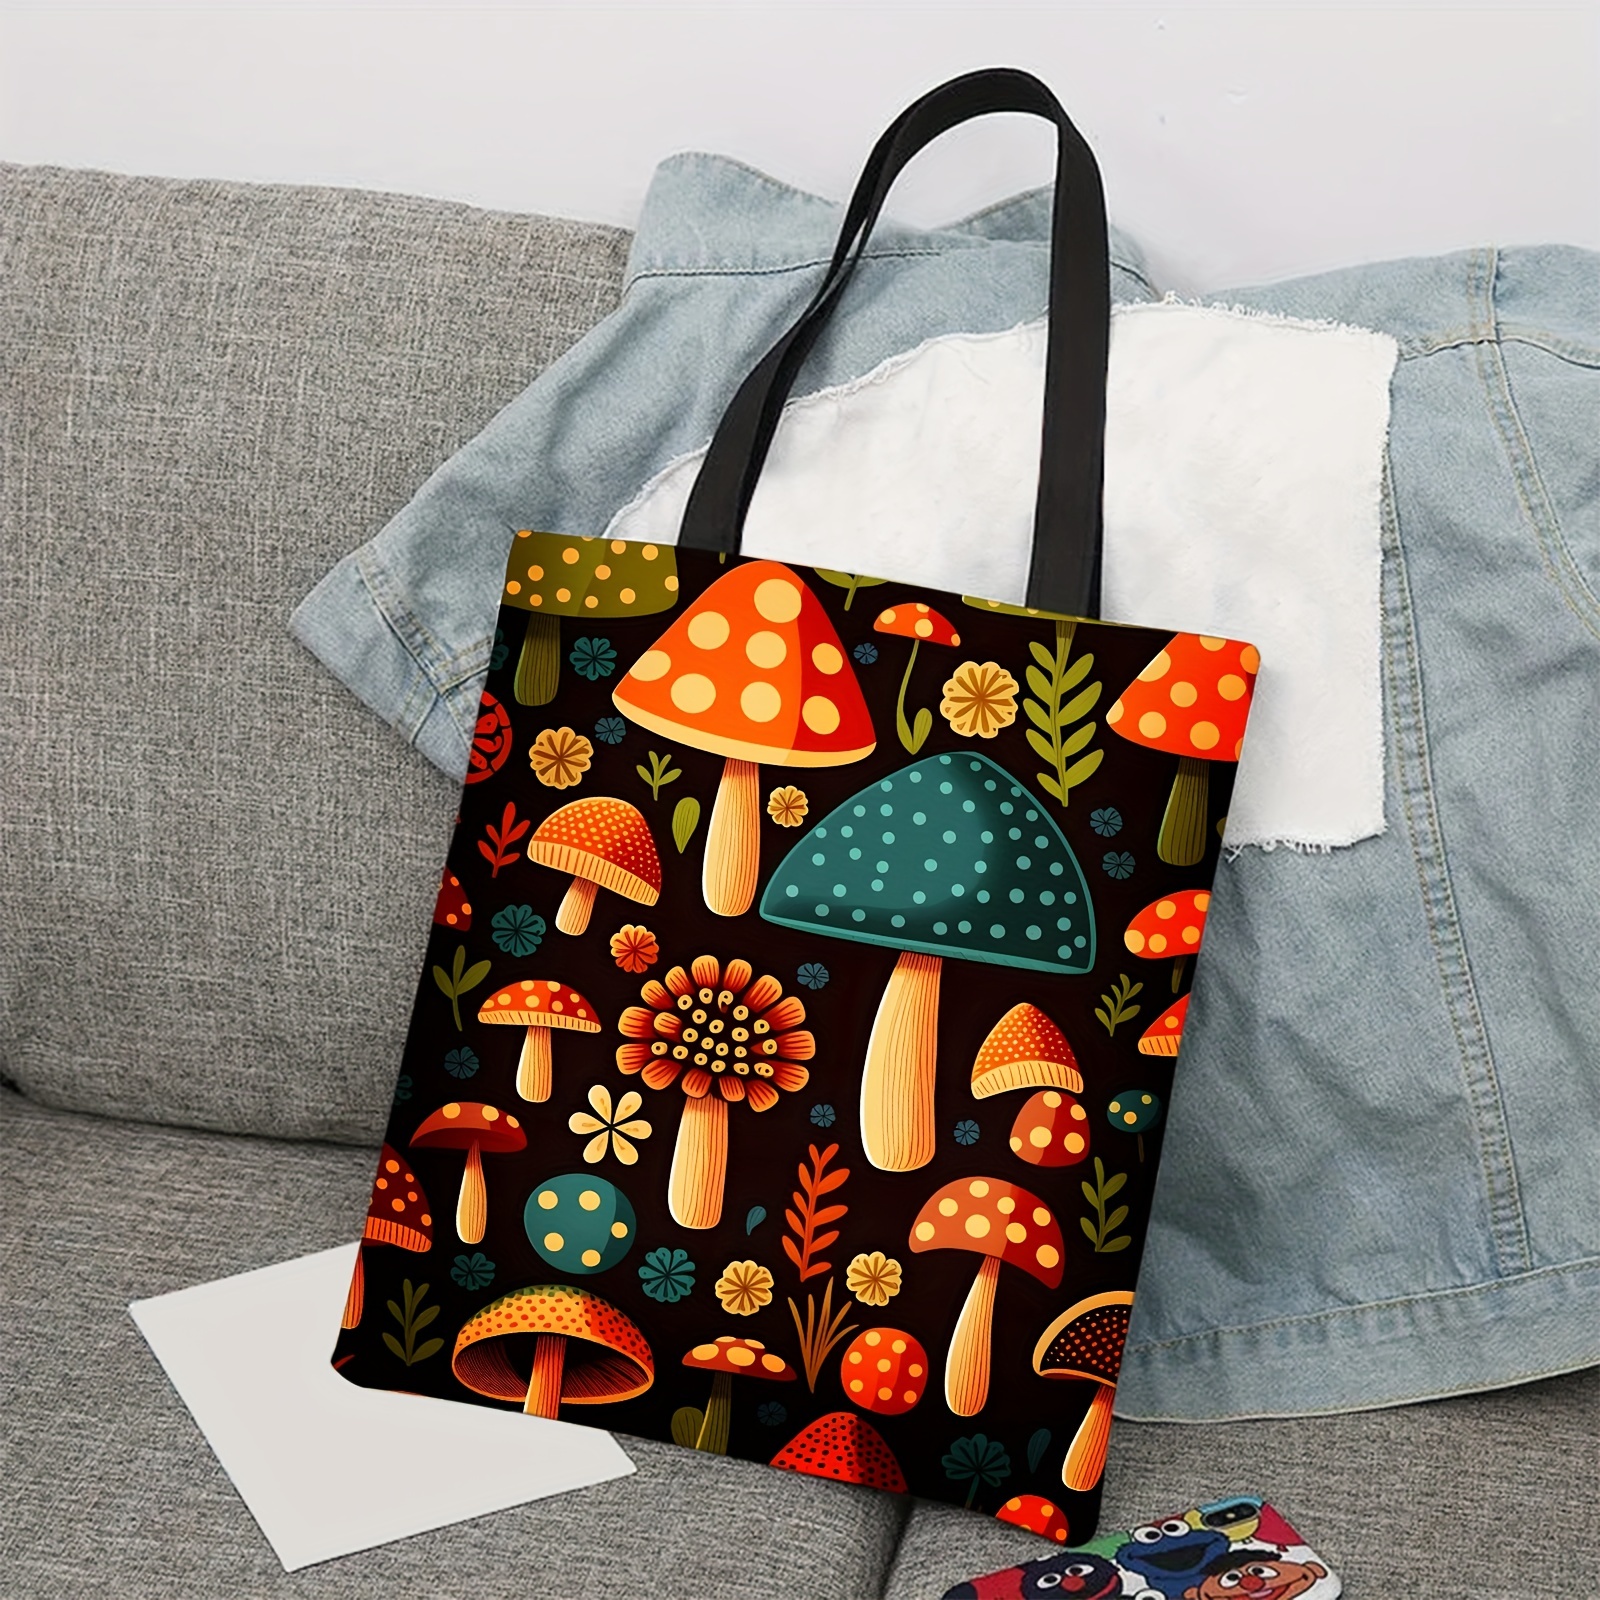  Graffiti Colorful Canvas Tote Bag Large Shoulder Bag For Women  And Girl Shopping Bags Reusable Canvas Handbags: Home & Kitchen